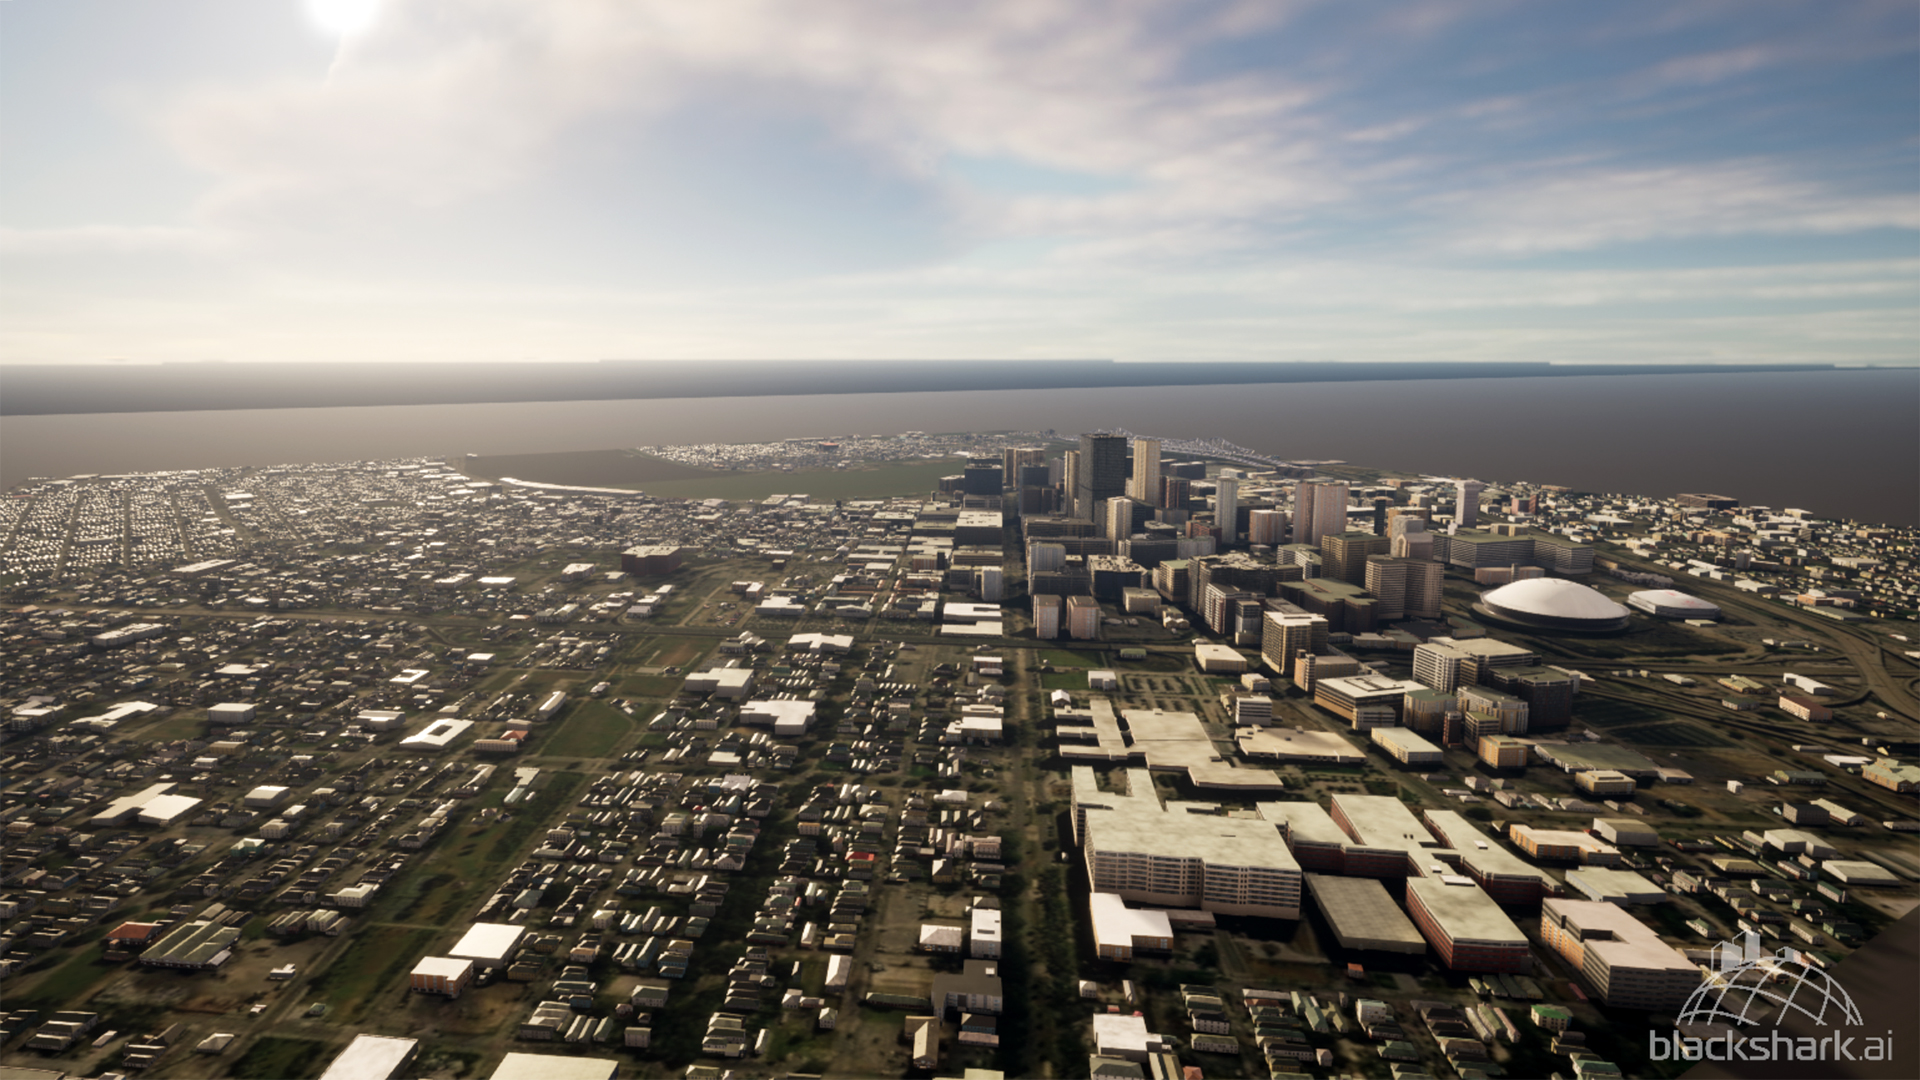 Unreal Engine-based demo application of New Orleans for Windows PCs